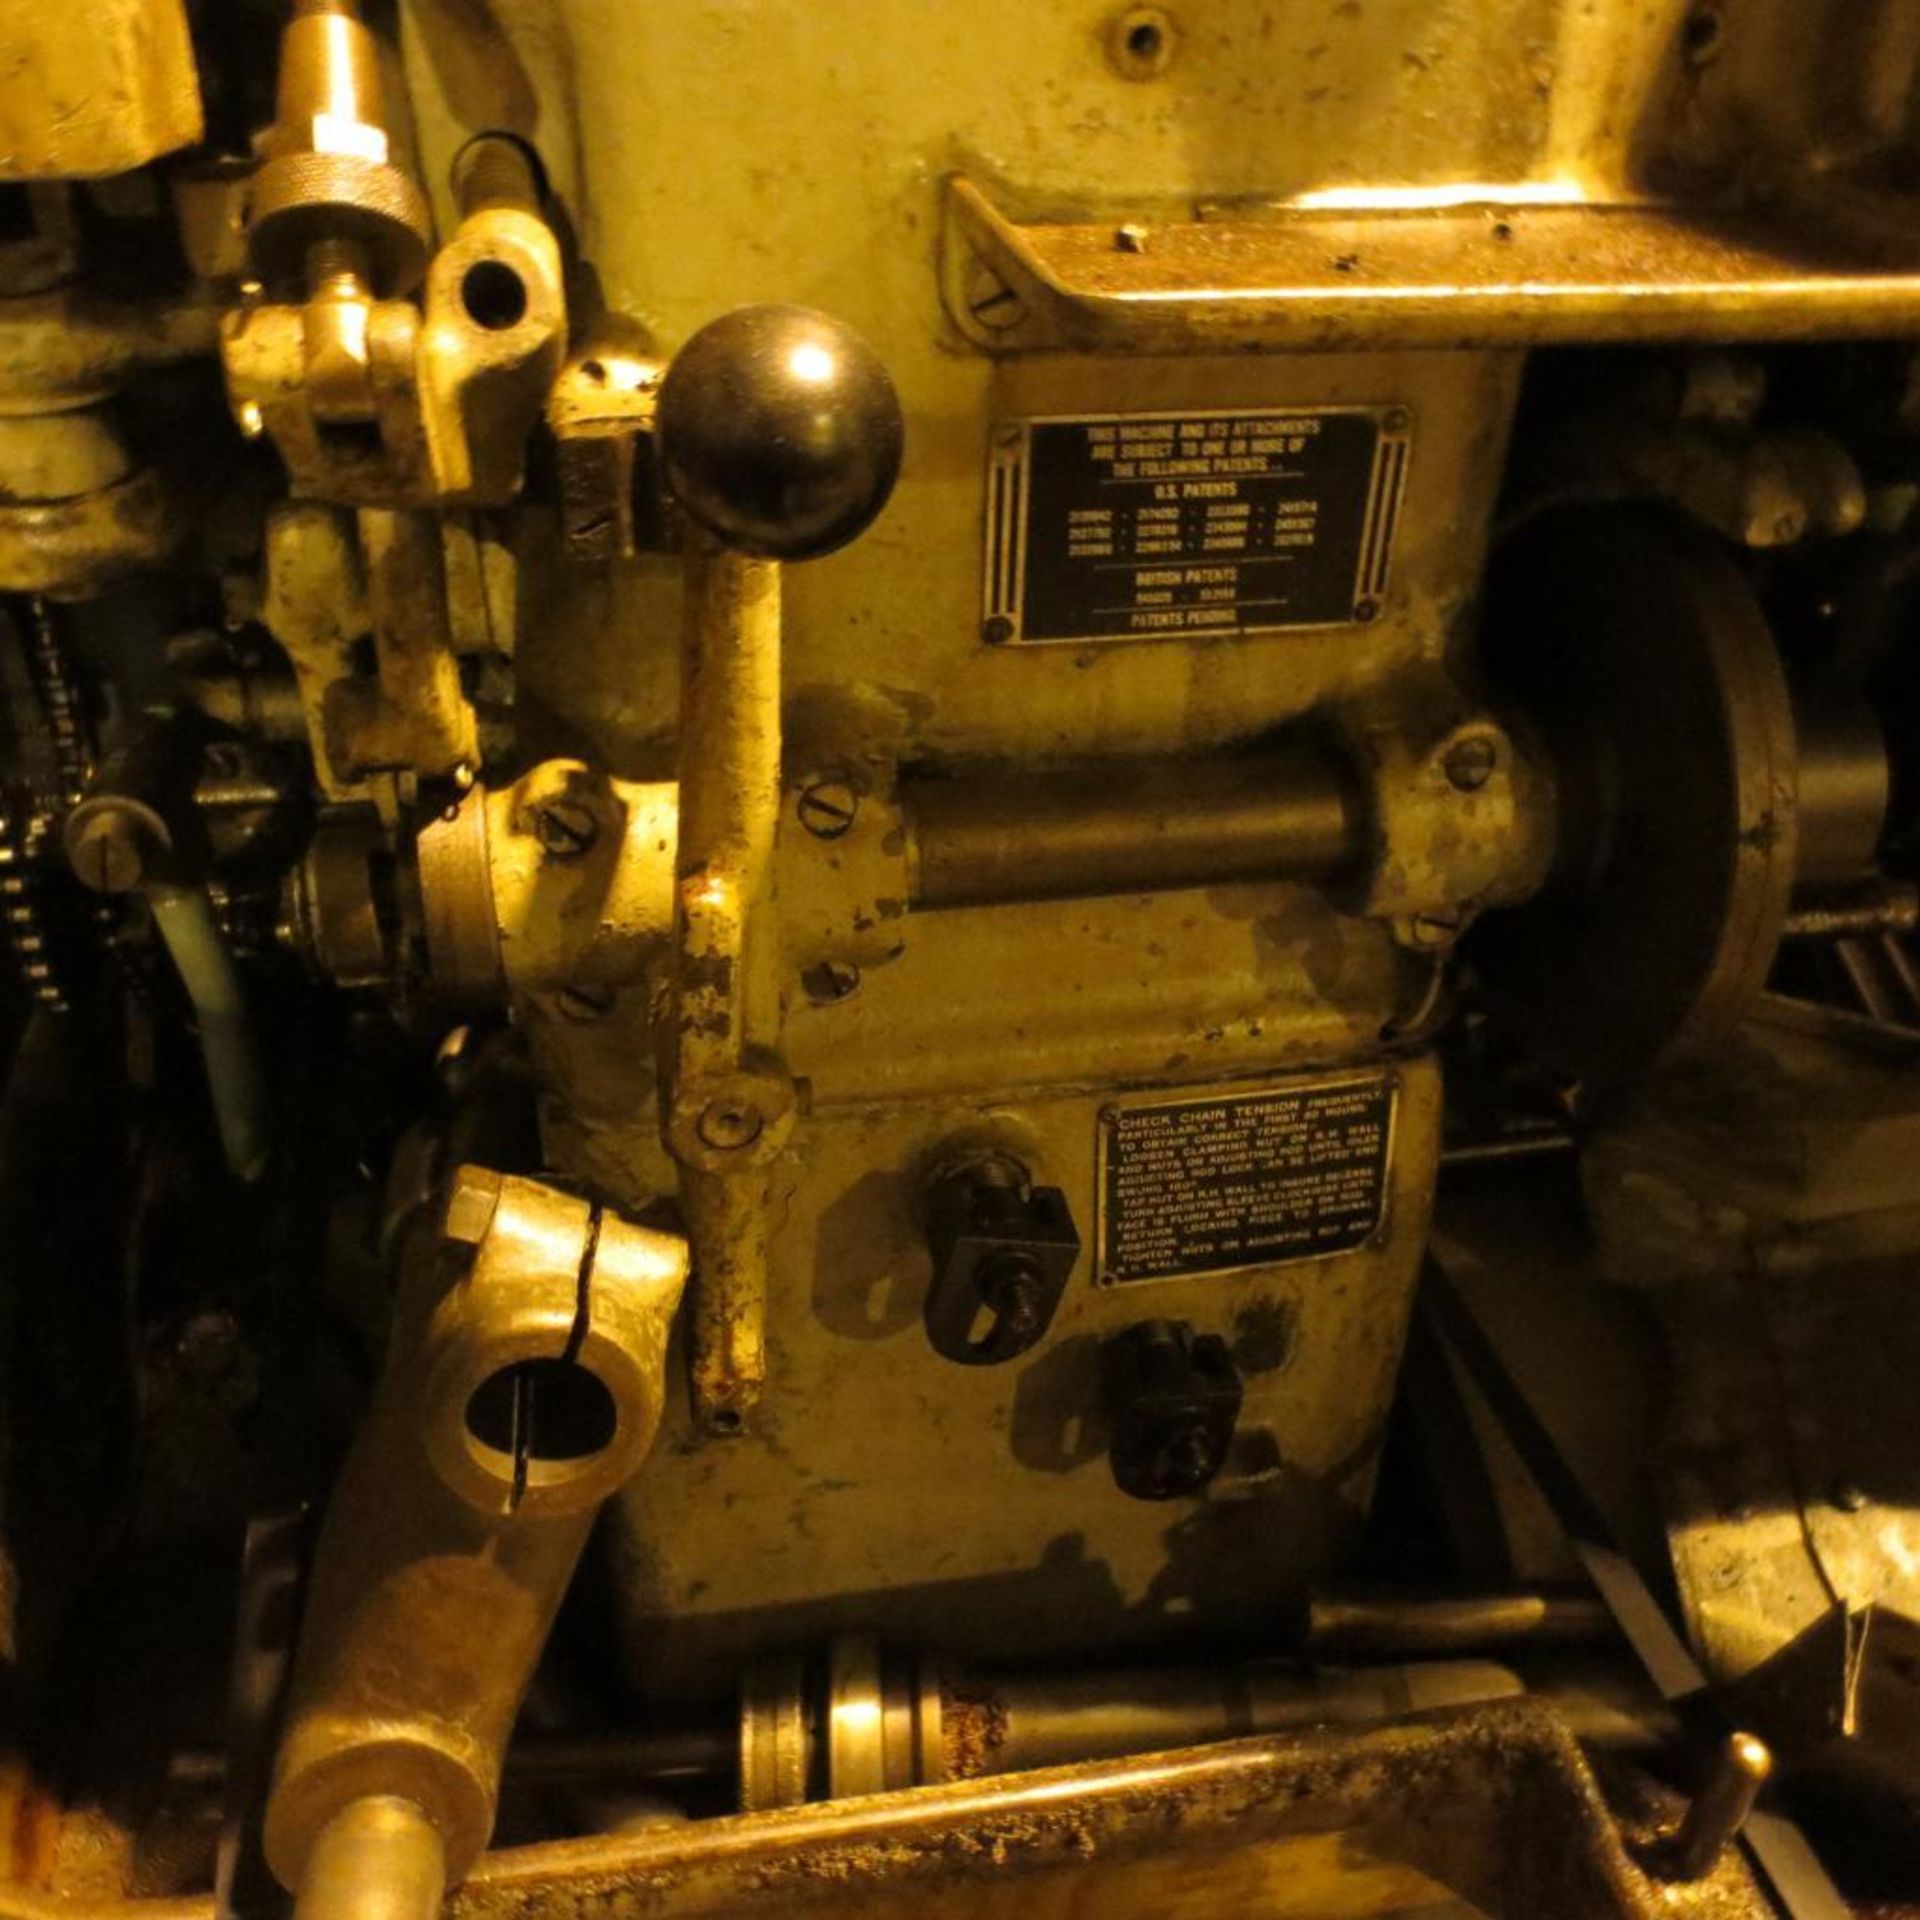 Brown & Sharpe 1-1/4" No. 2G Single Spindle Automatic Screw Machine S/N 542-2-1375 *RIGGING $100* - Image 4 of 6